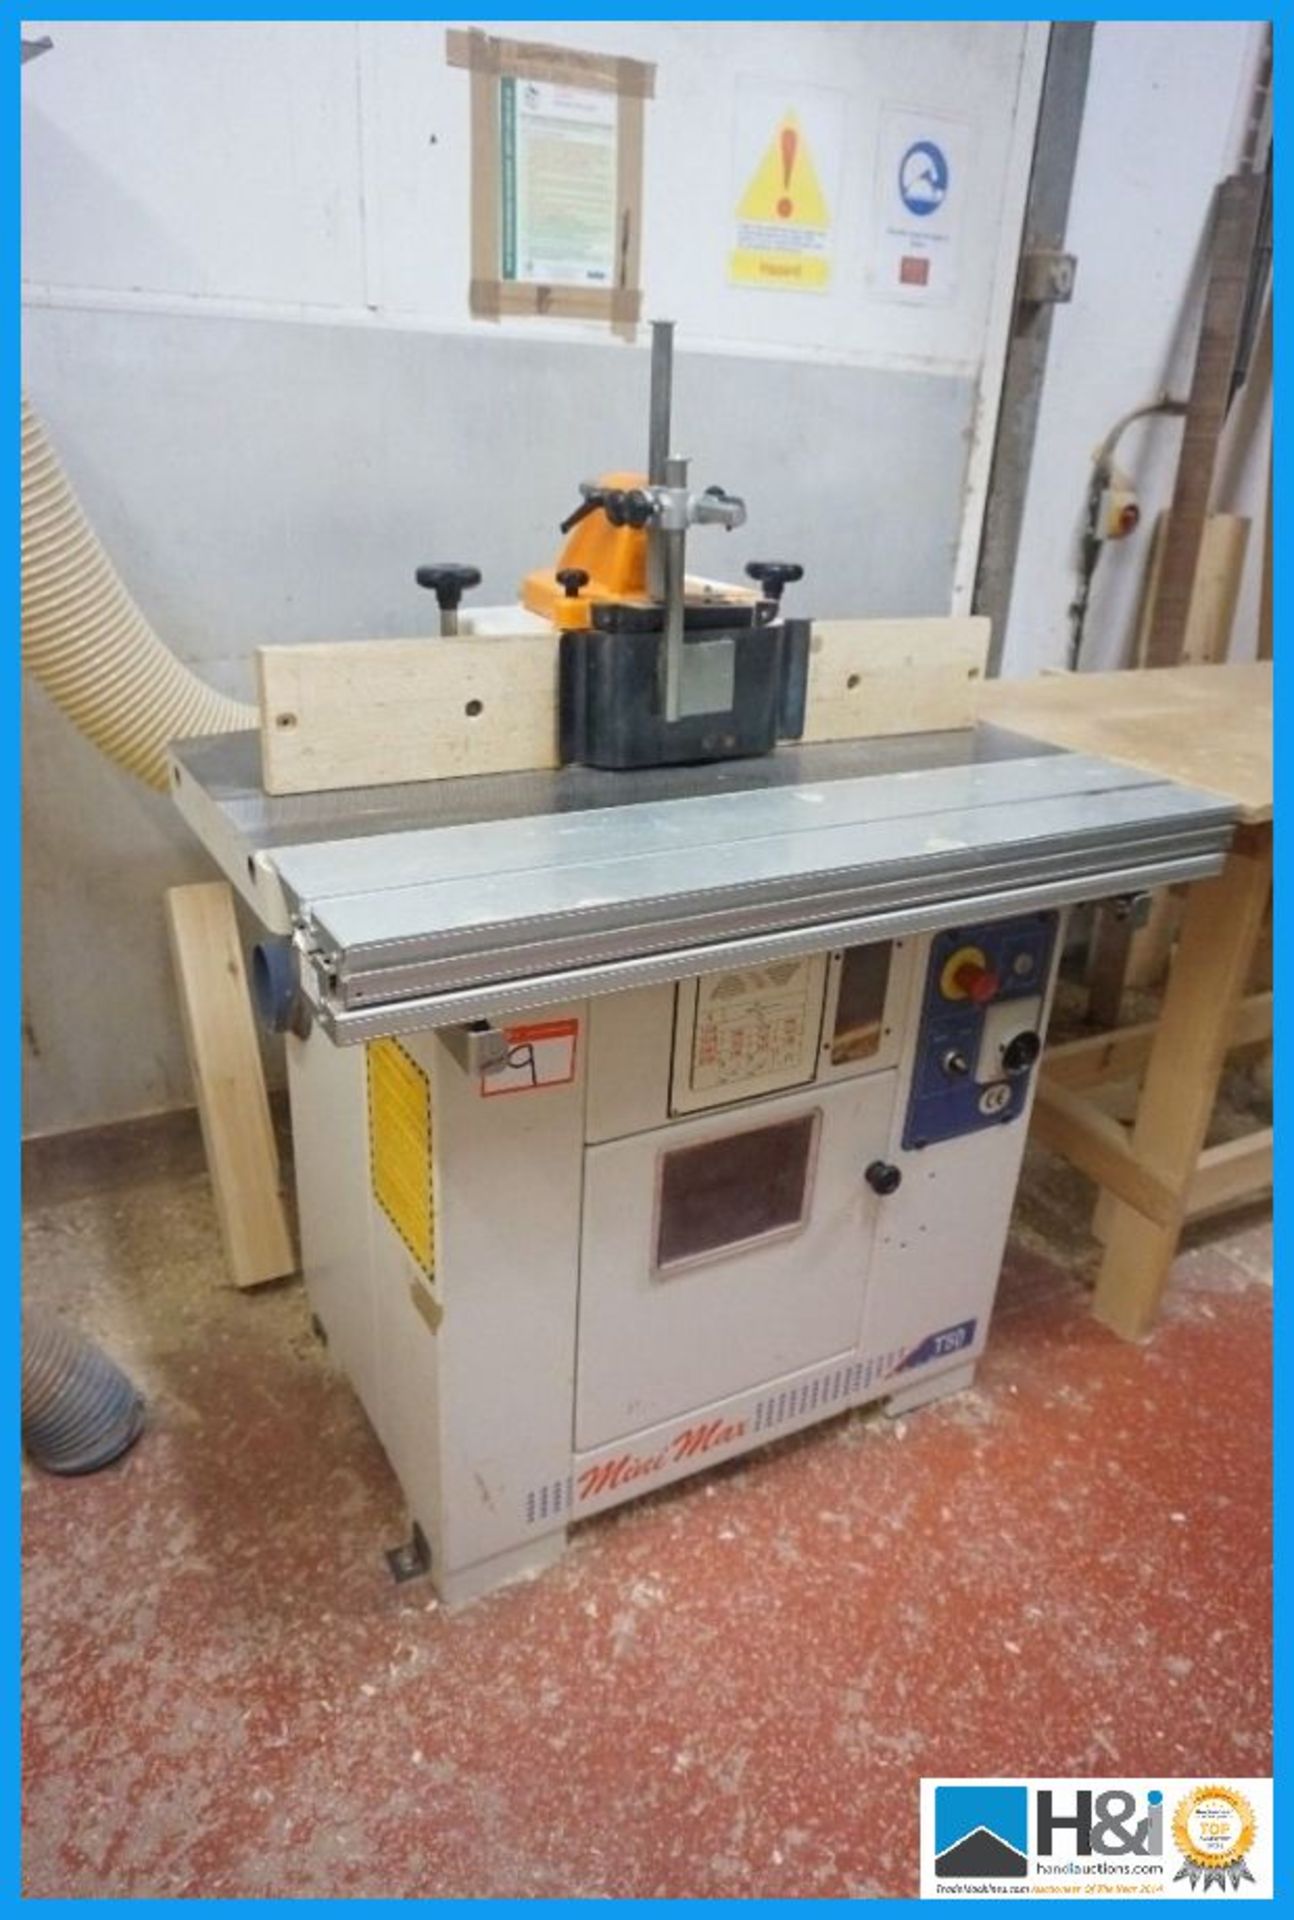 SCM Minimax T50 spindle Moulder with sliding carriage. 3 phase. Tooling not included. Comes - Image 2 of 5